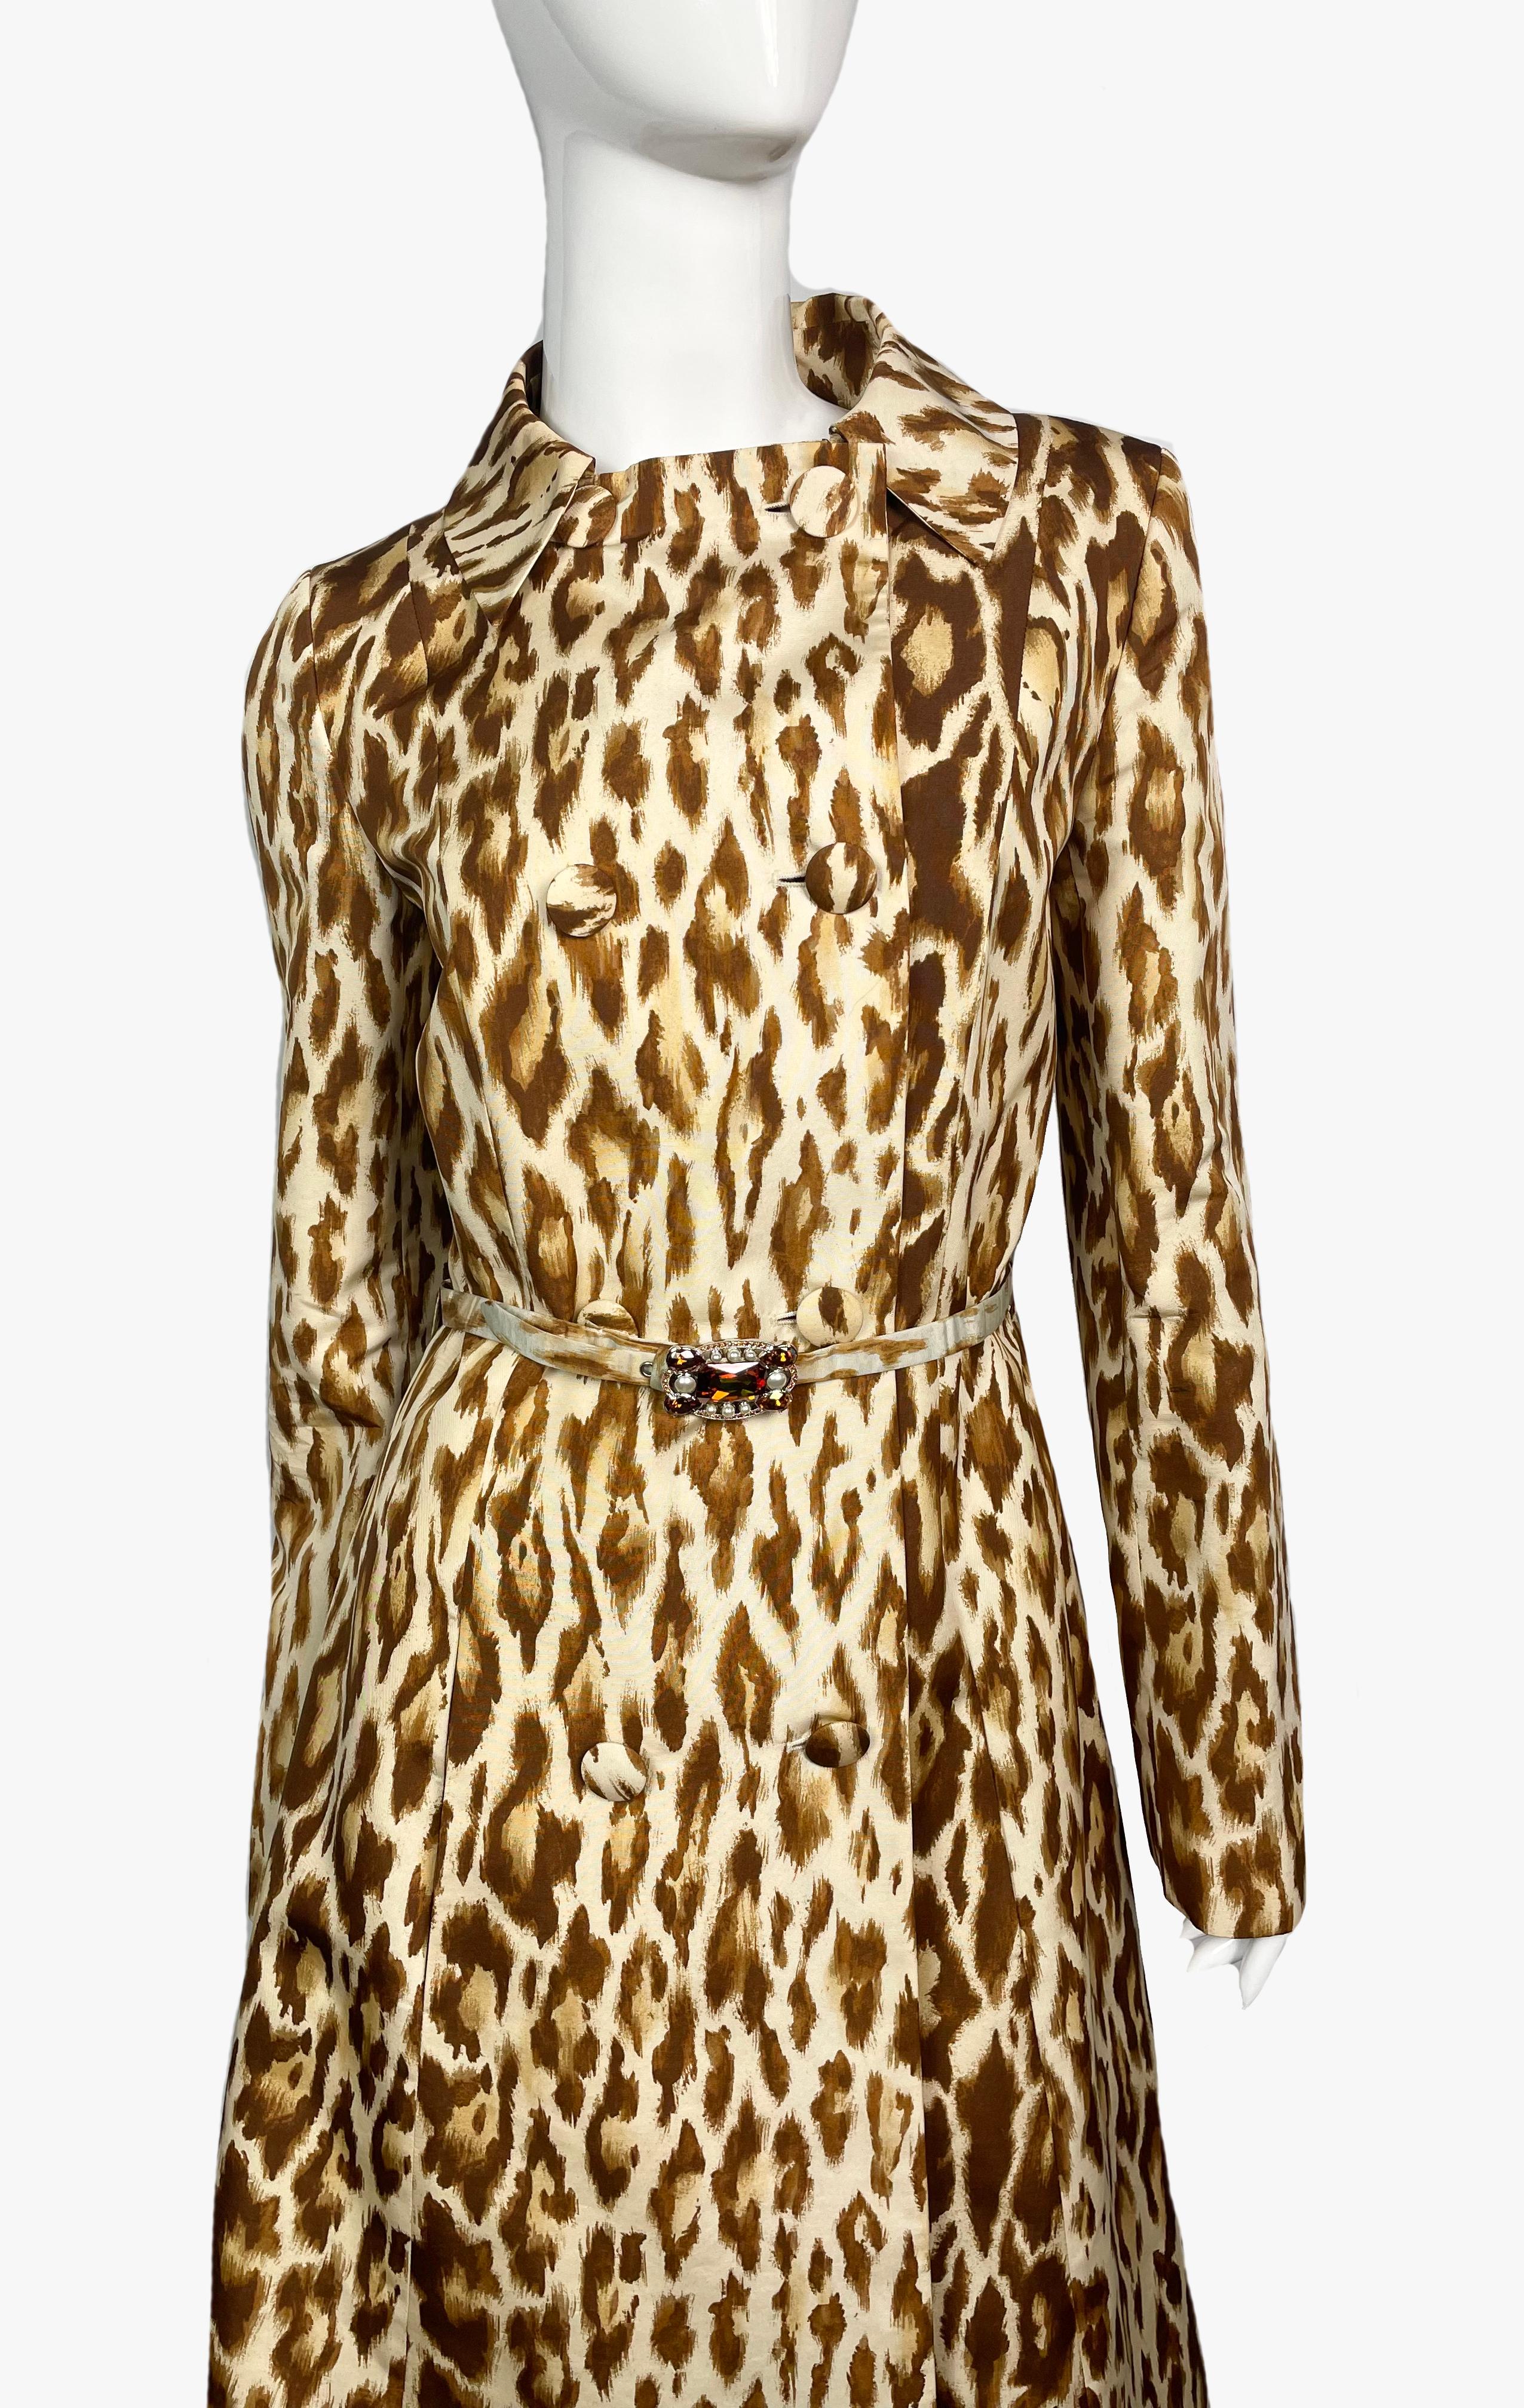 Christian Dior leopard print silk trench from Resort 2008 collection. 
Beige, brown colors.
Includes belt, buckle trimmed with stones and pearls. 
Button fastening, 2 pockets, fully lined. 
Composition:  100% silk, lining 100% silk
Condition: very